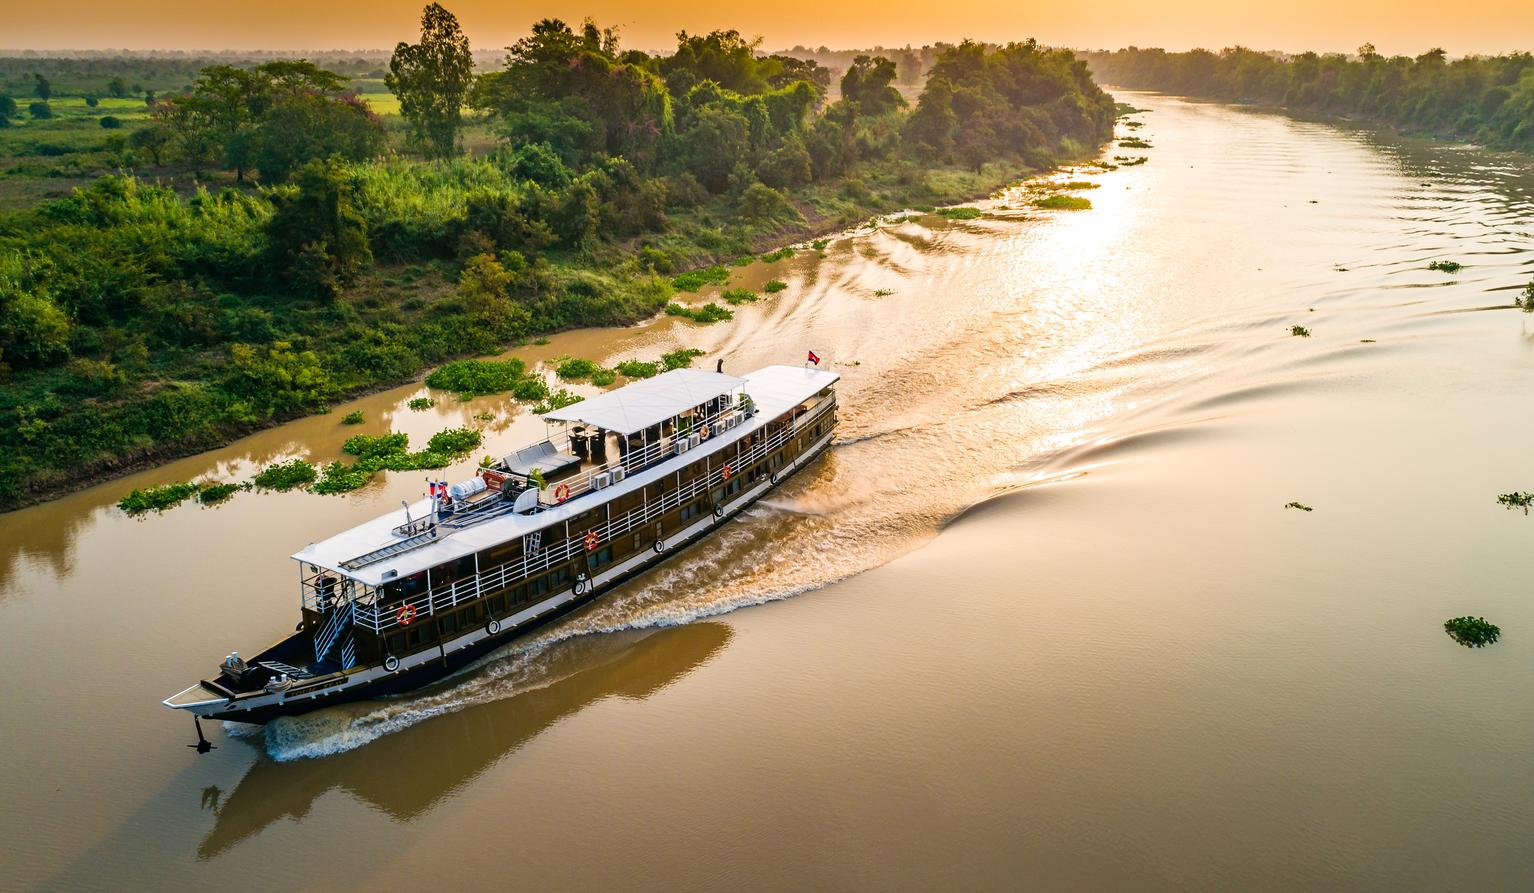 If You Get 17/24 on This Quiz, You’re a Geography Whiz Mekong River